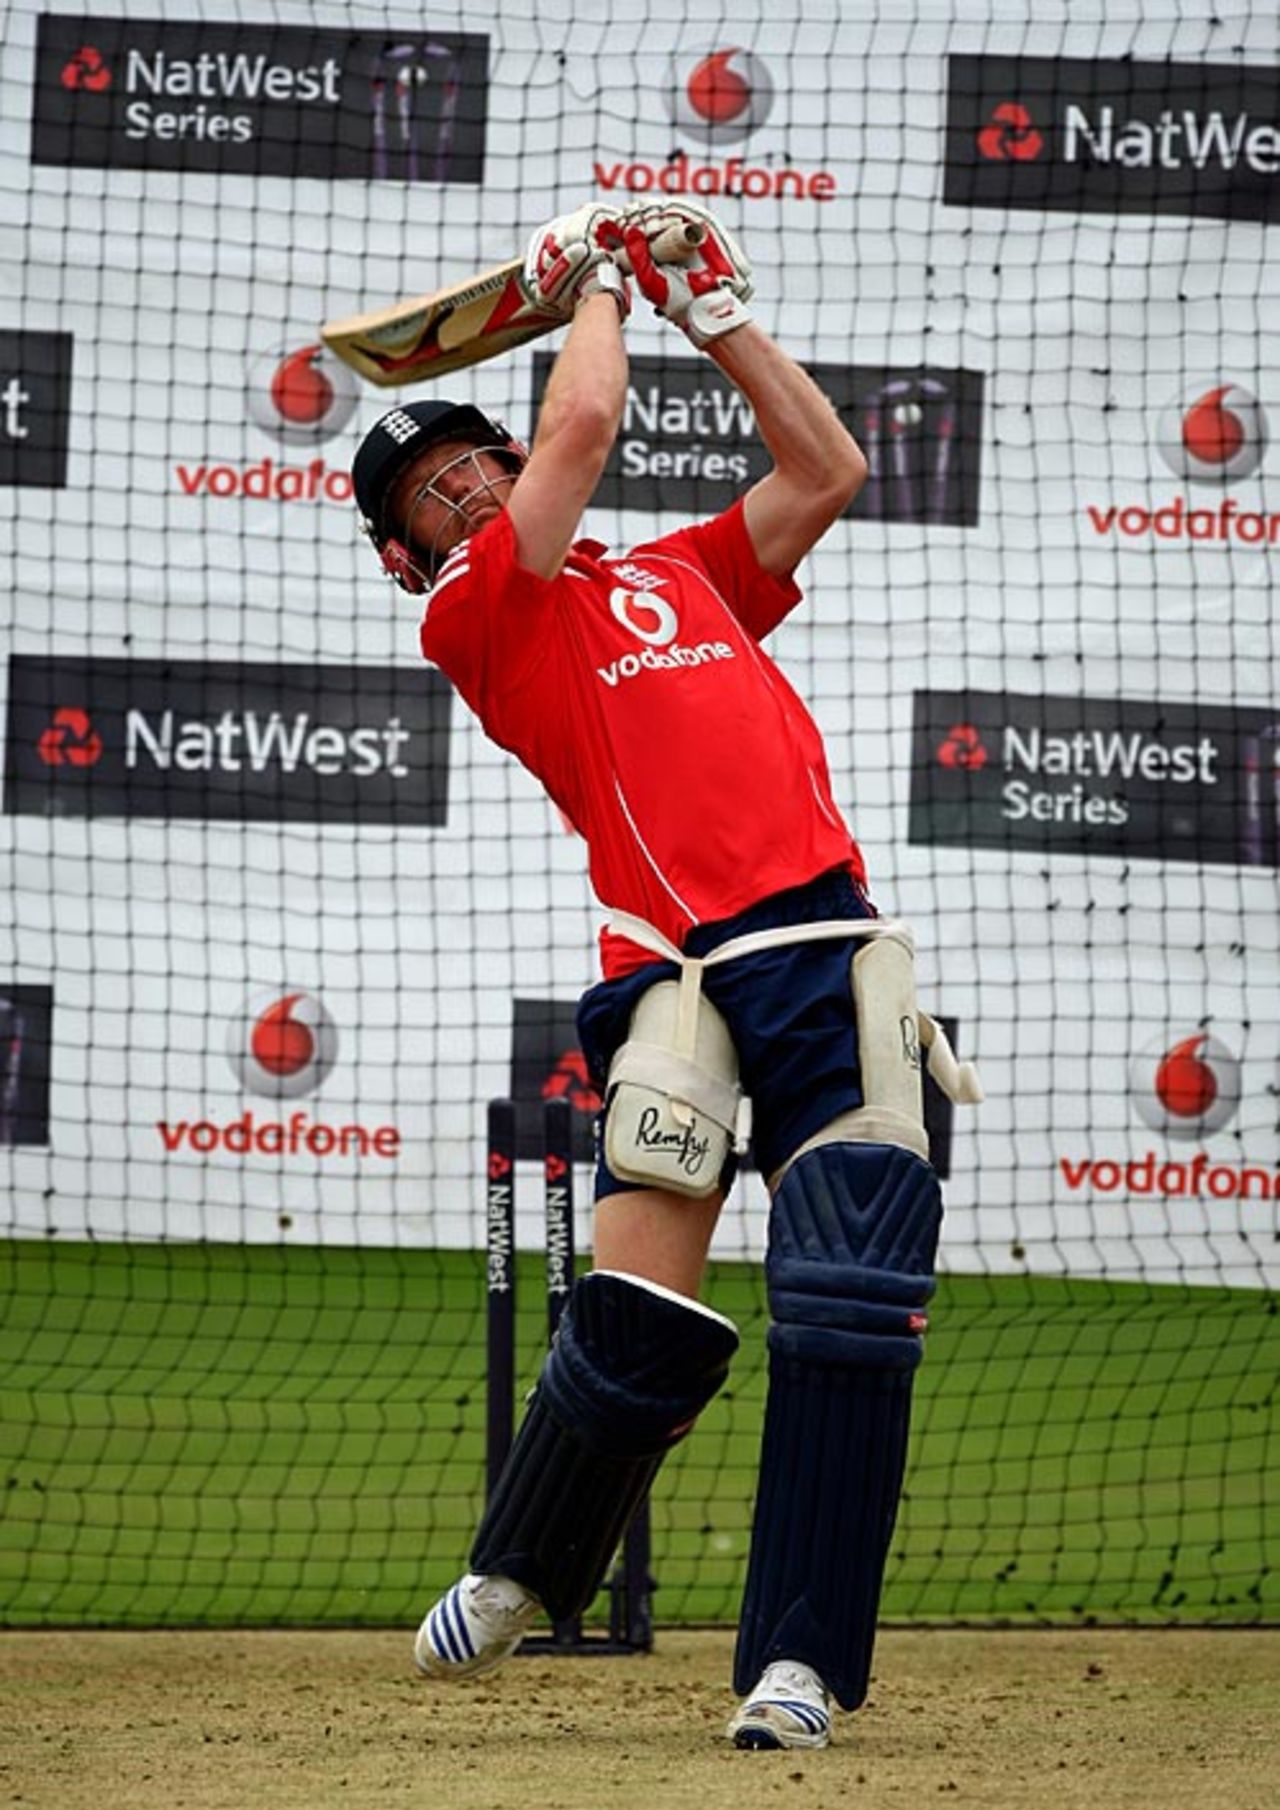 Paul Collingwood in attacking mode at the nets session, The Oval, August 28, 2008